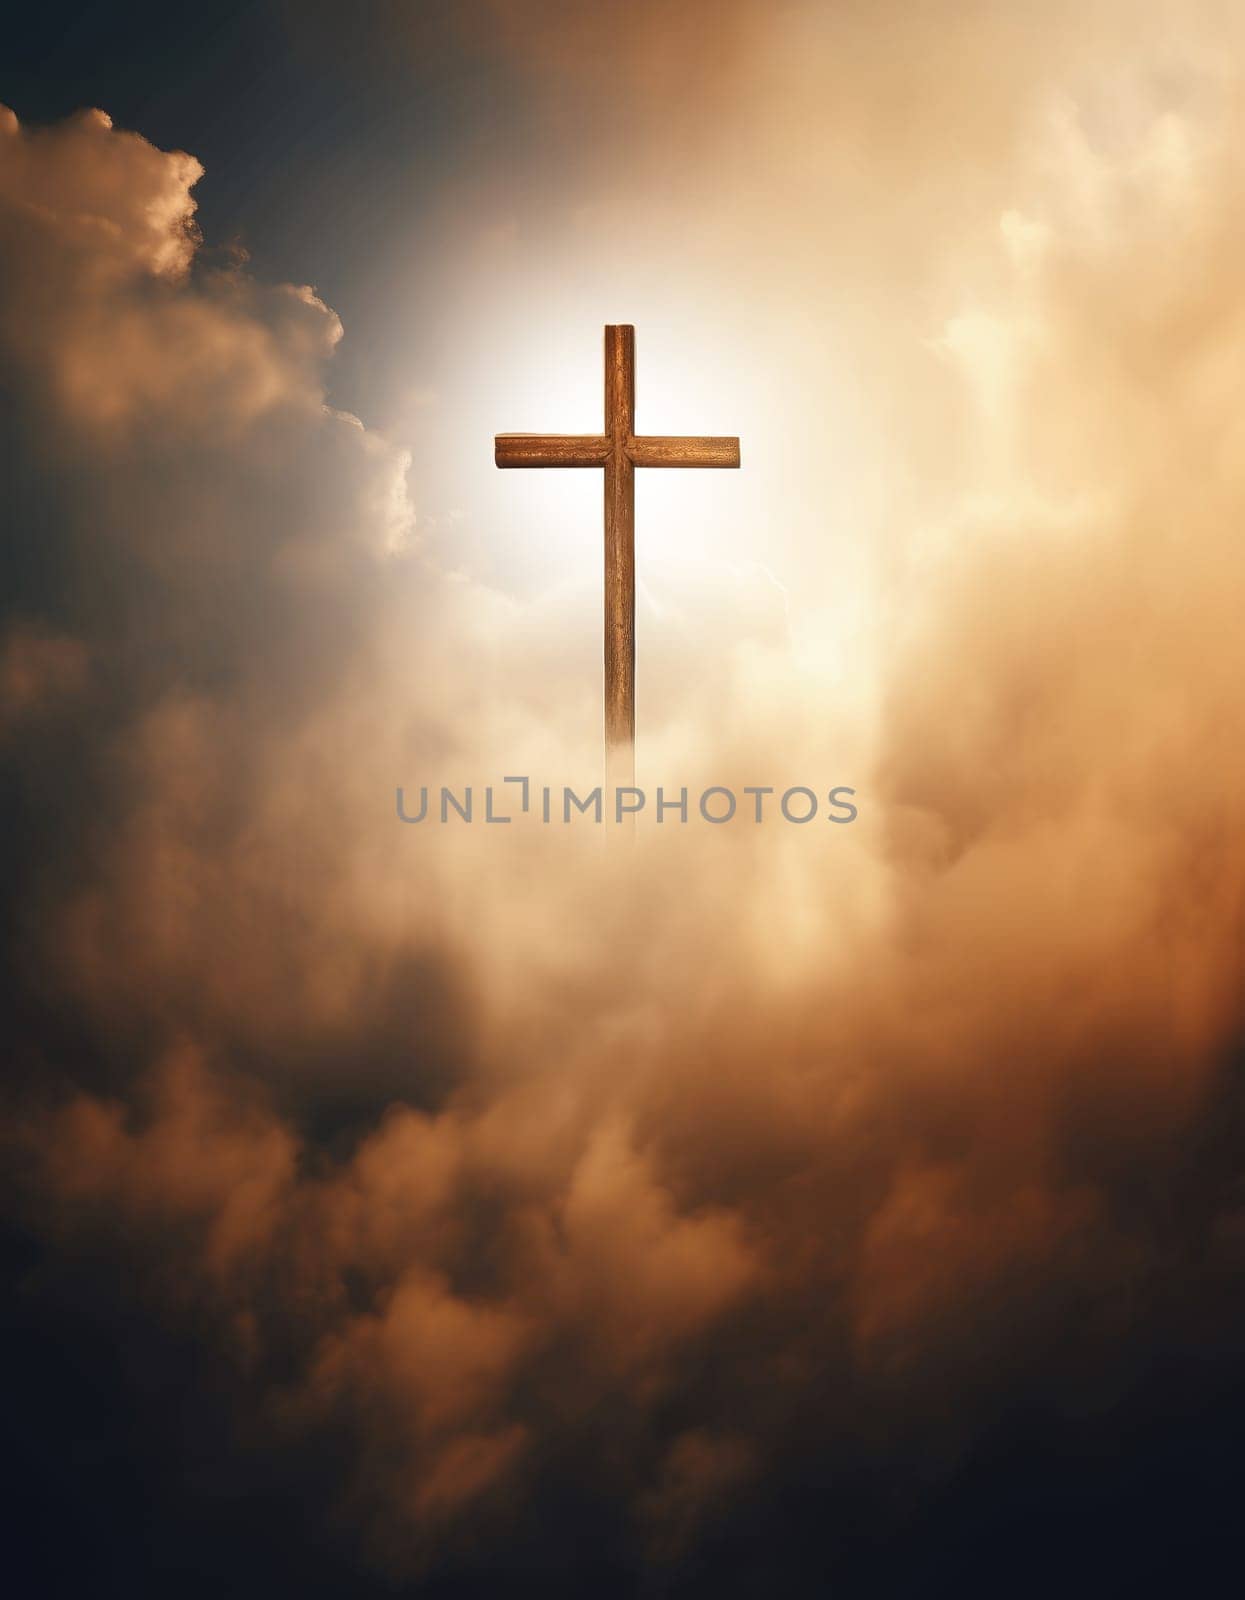 Cross in the clouds radiates the light of faith and hope by palinchak